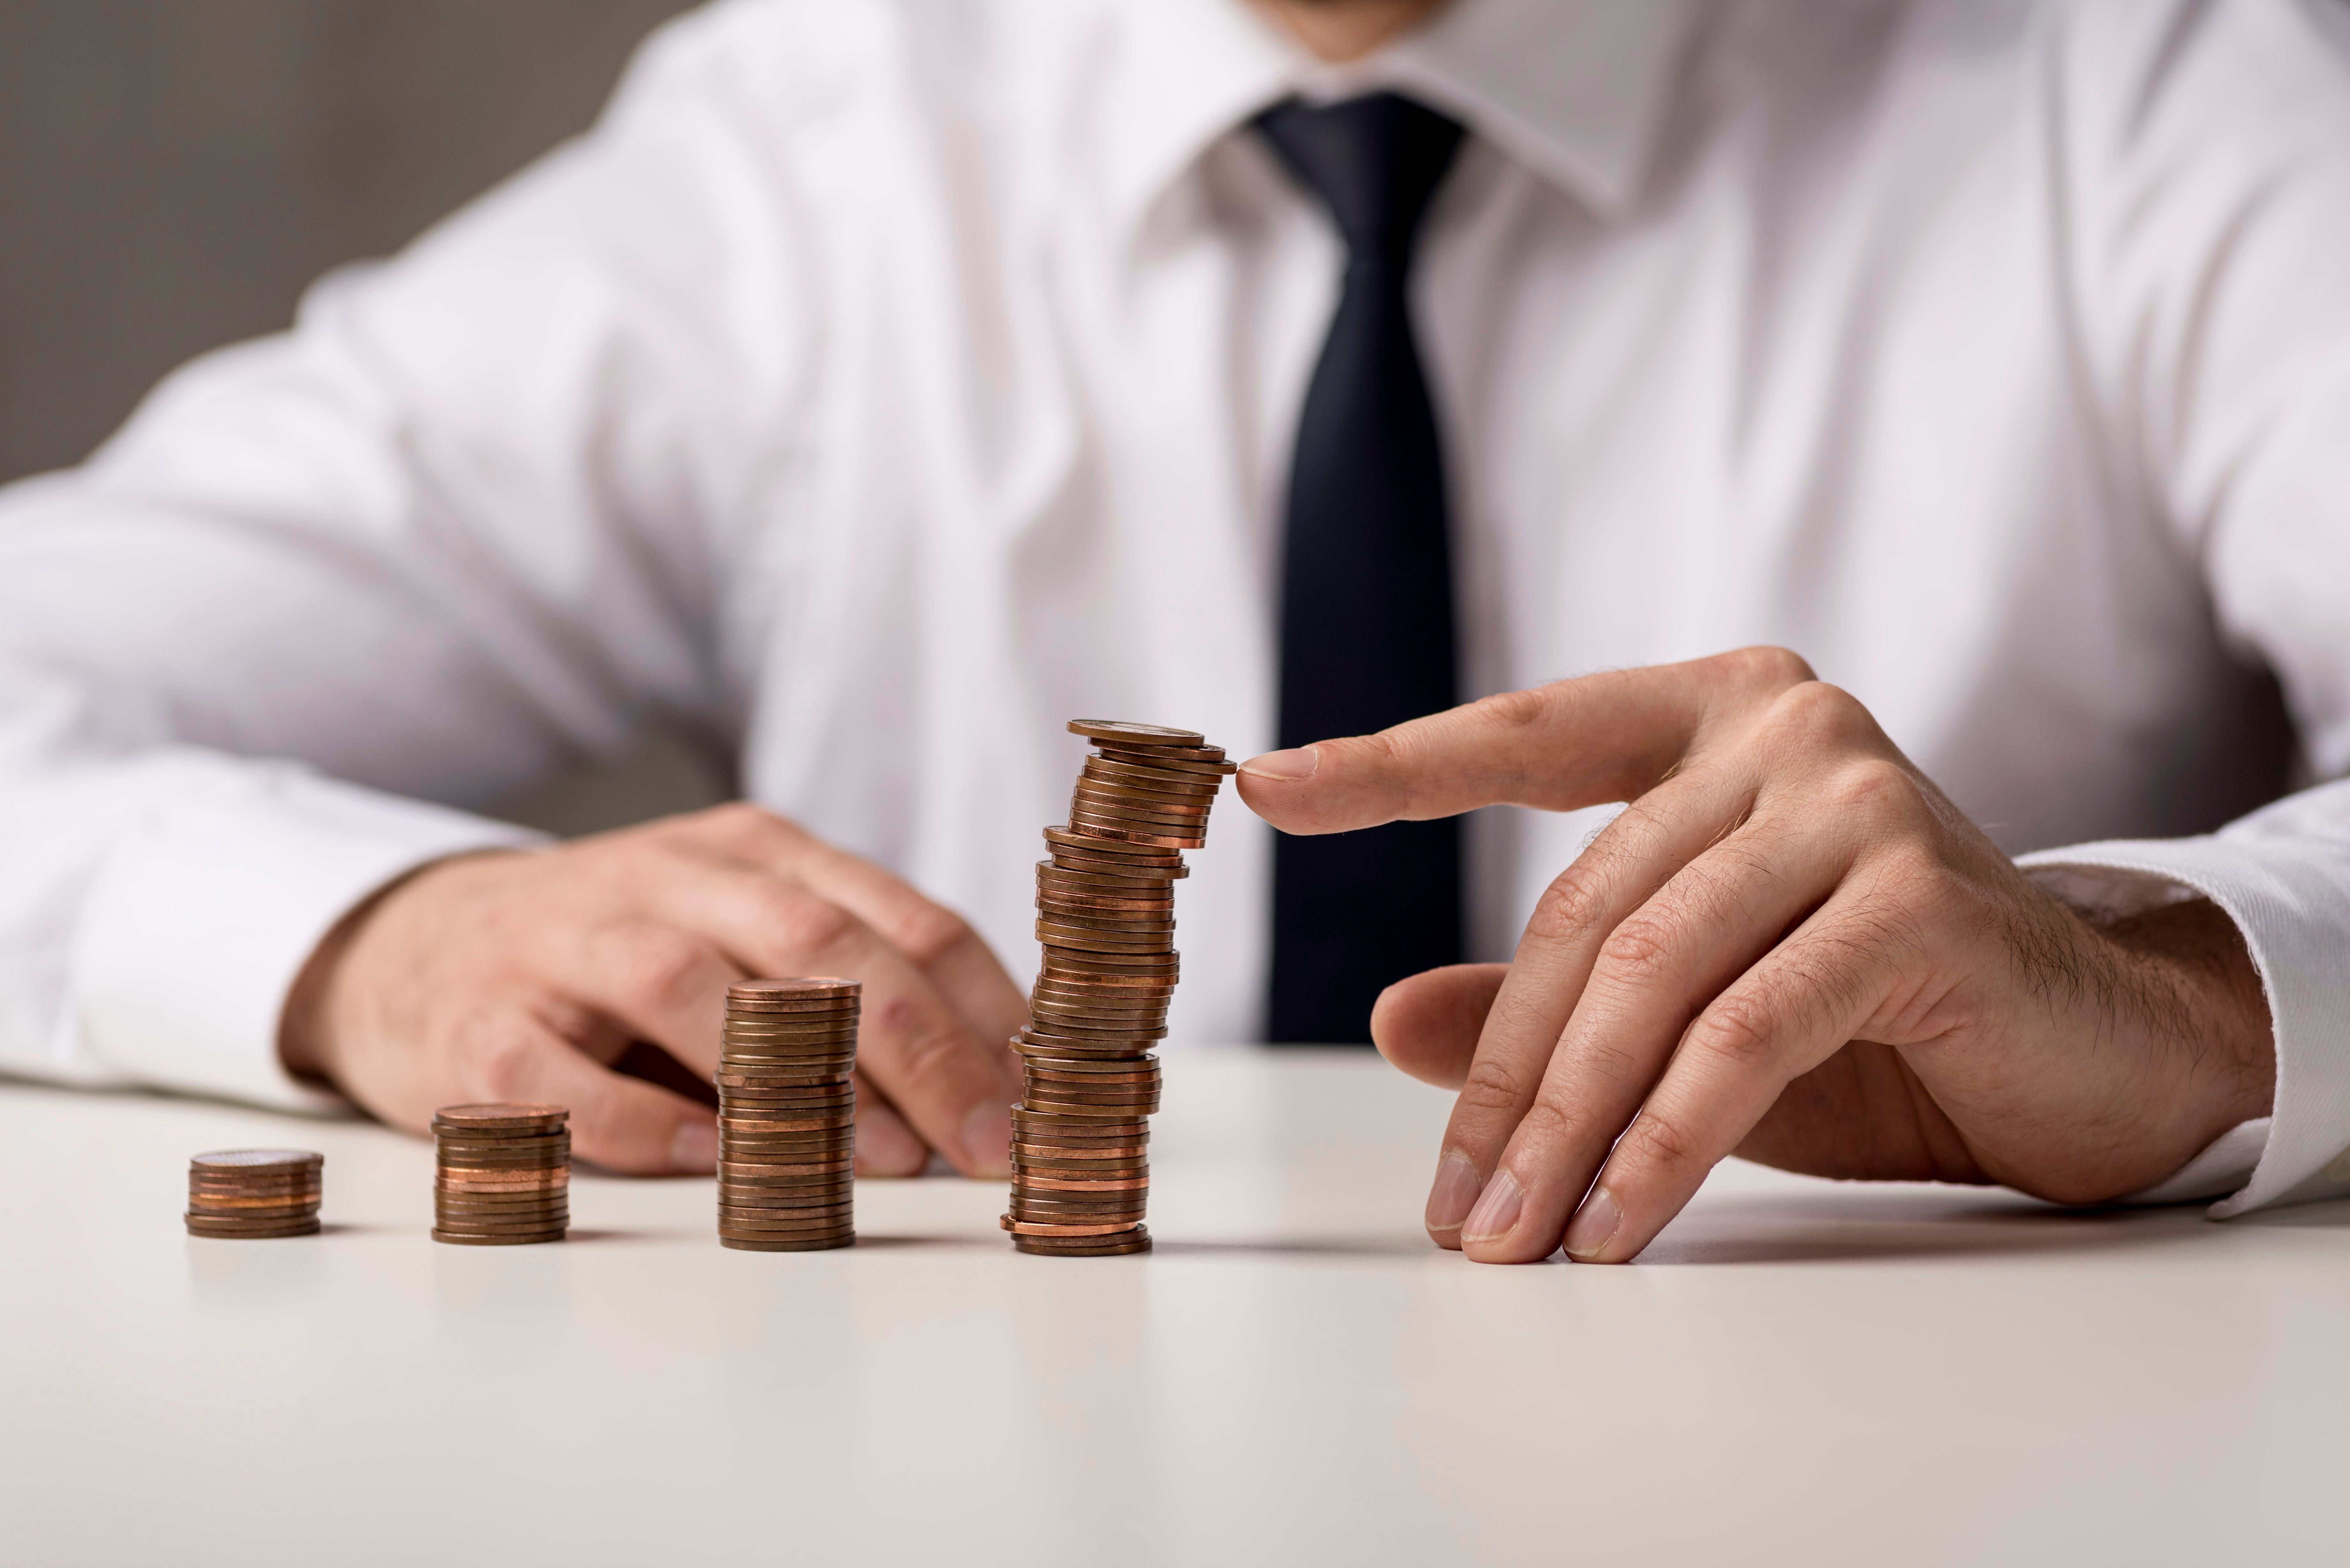 front-view-businessman-suit-tie-with-coins.jpg